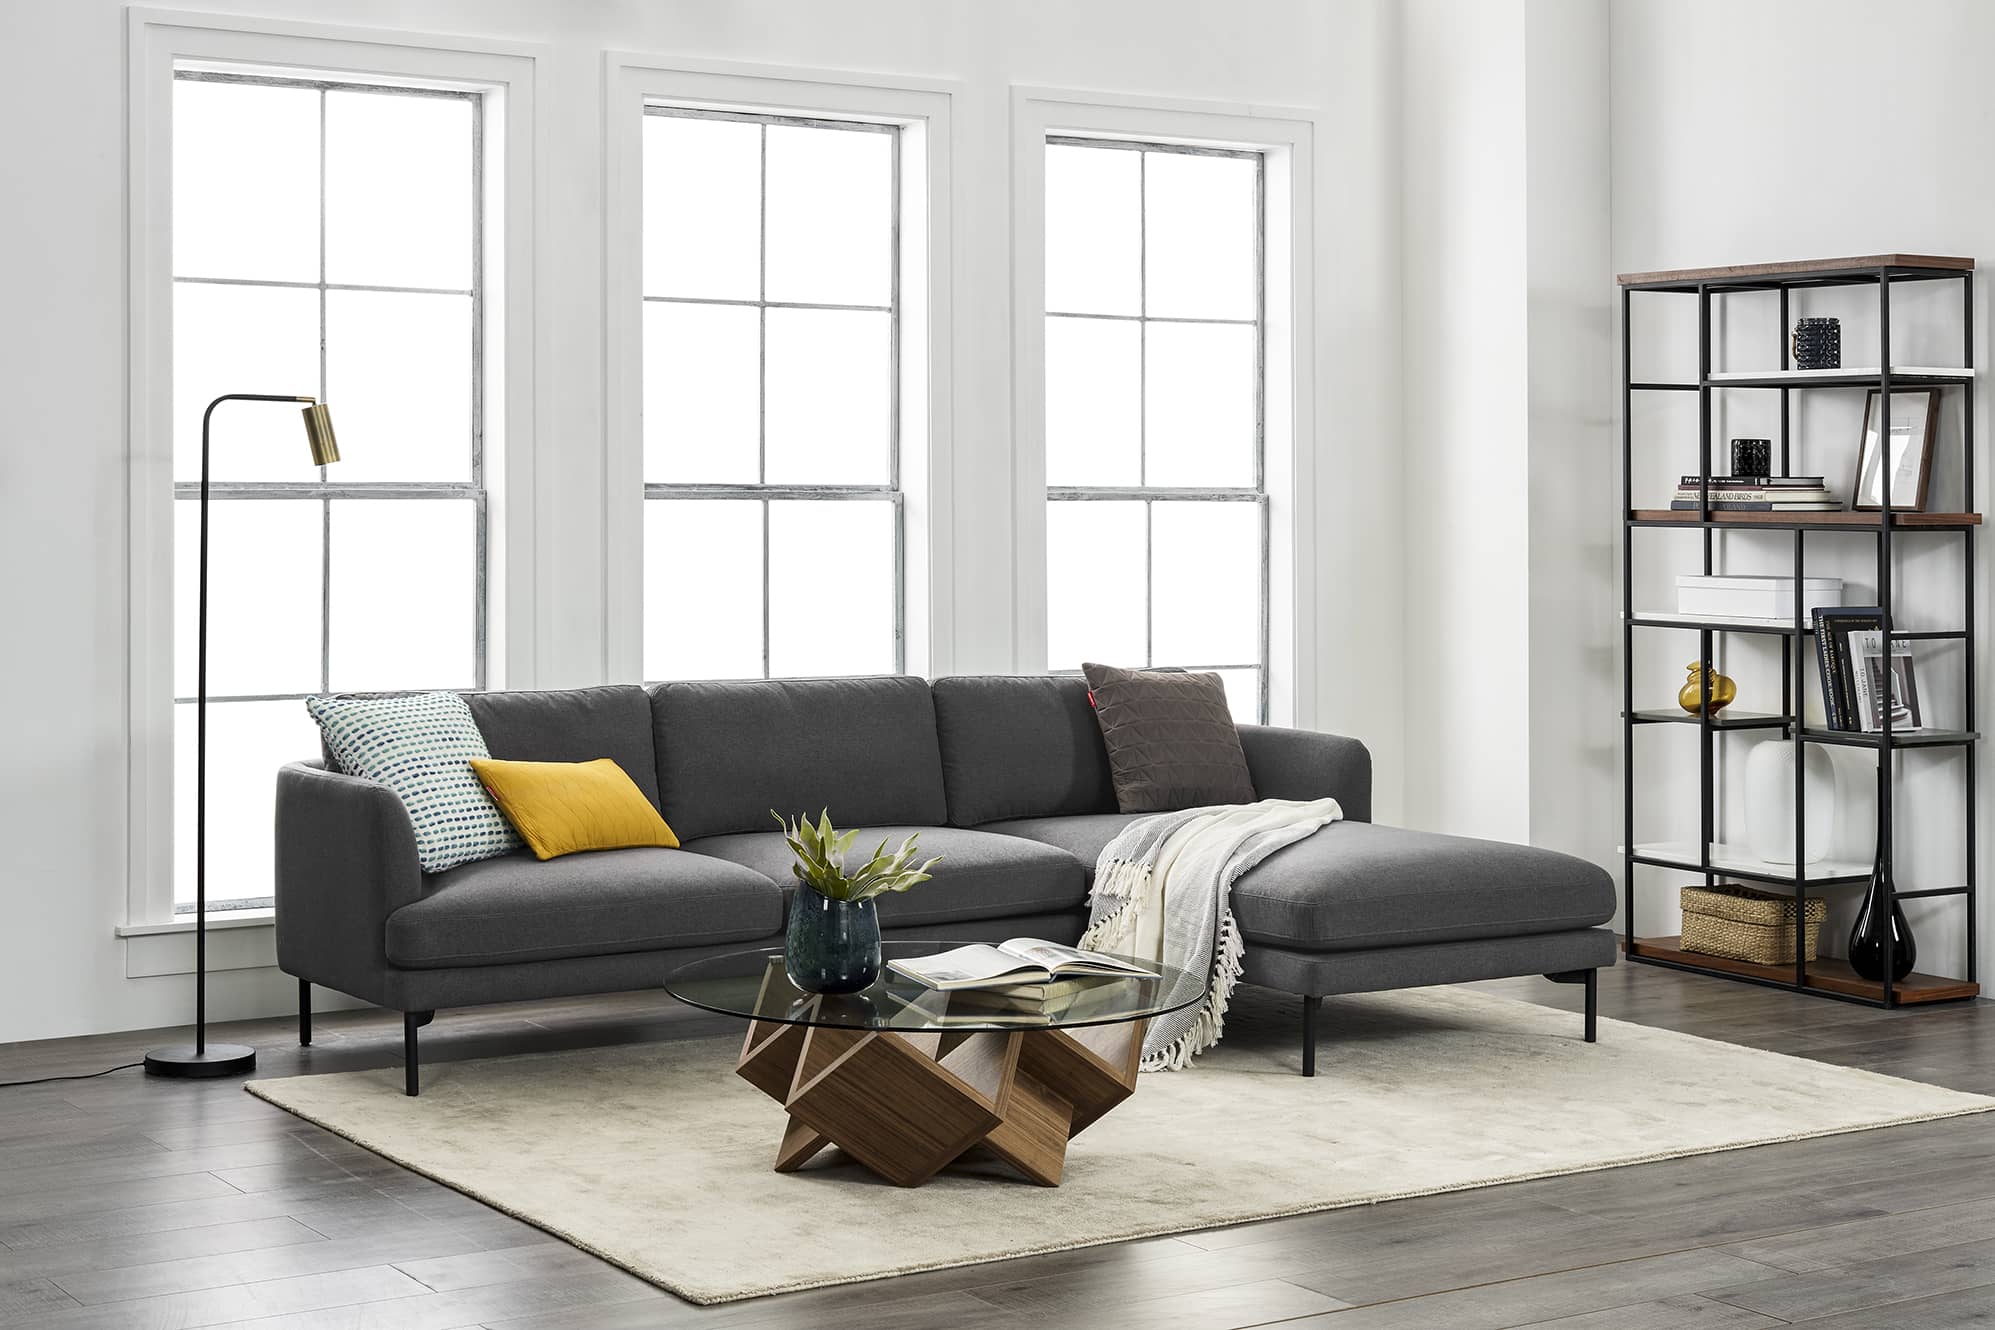 How To Build A Chaise Lounge Sofa